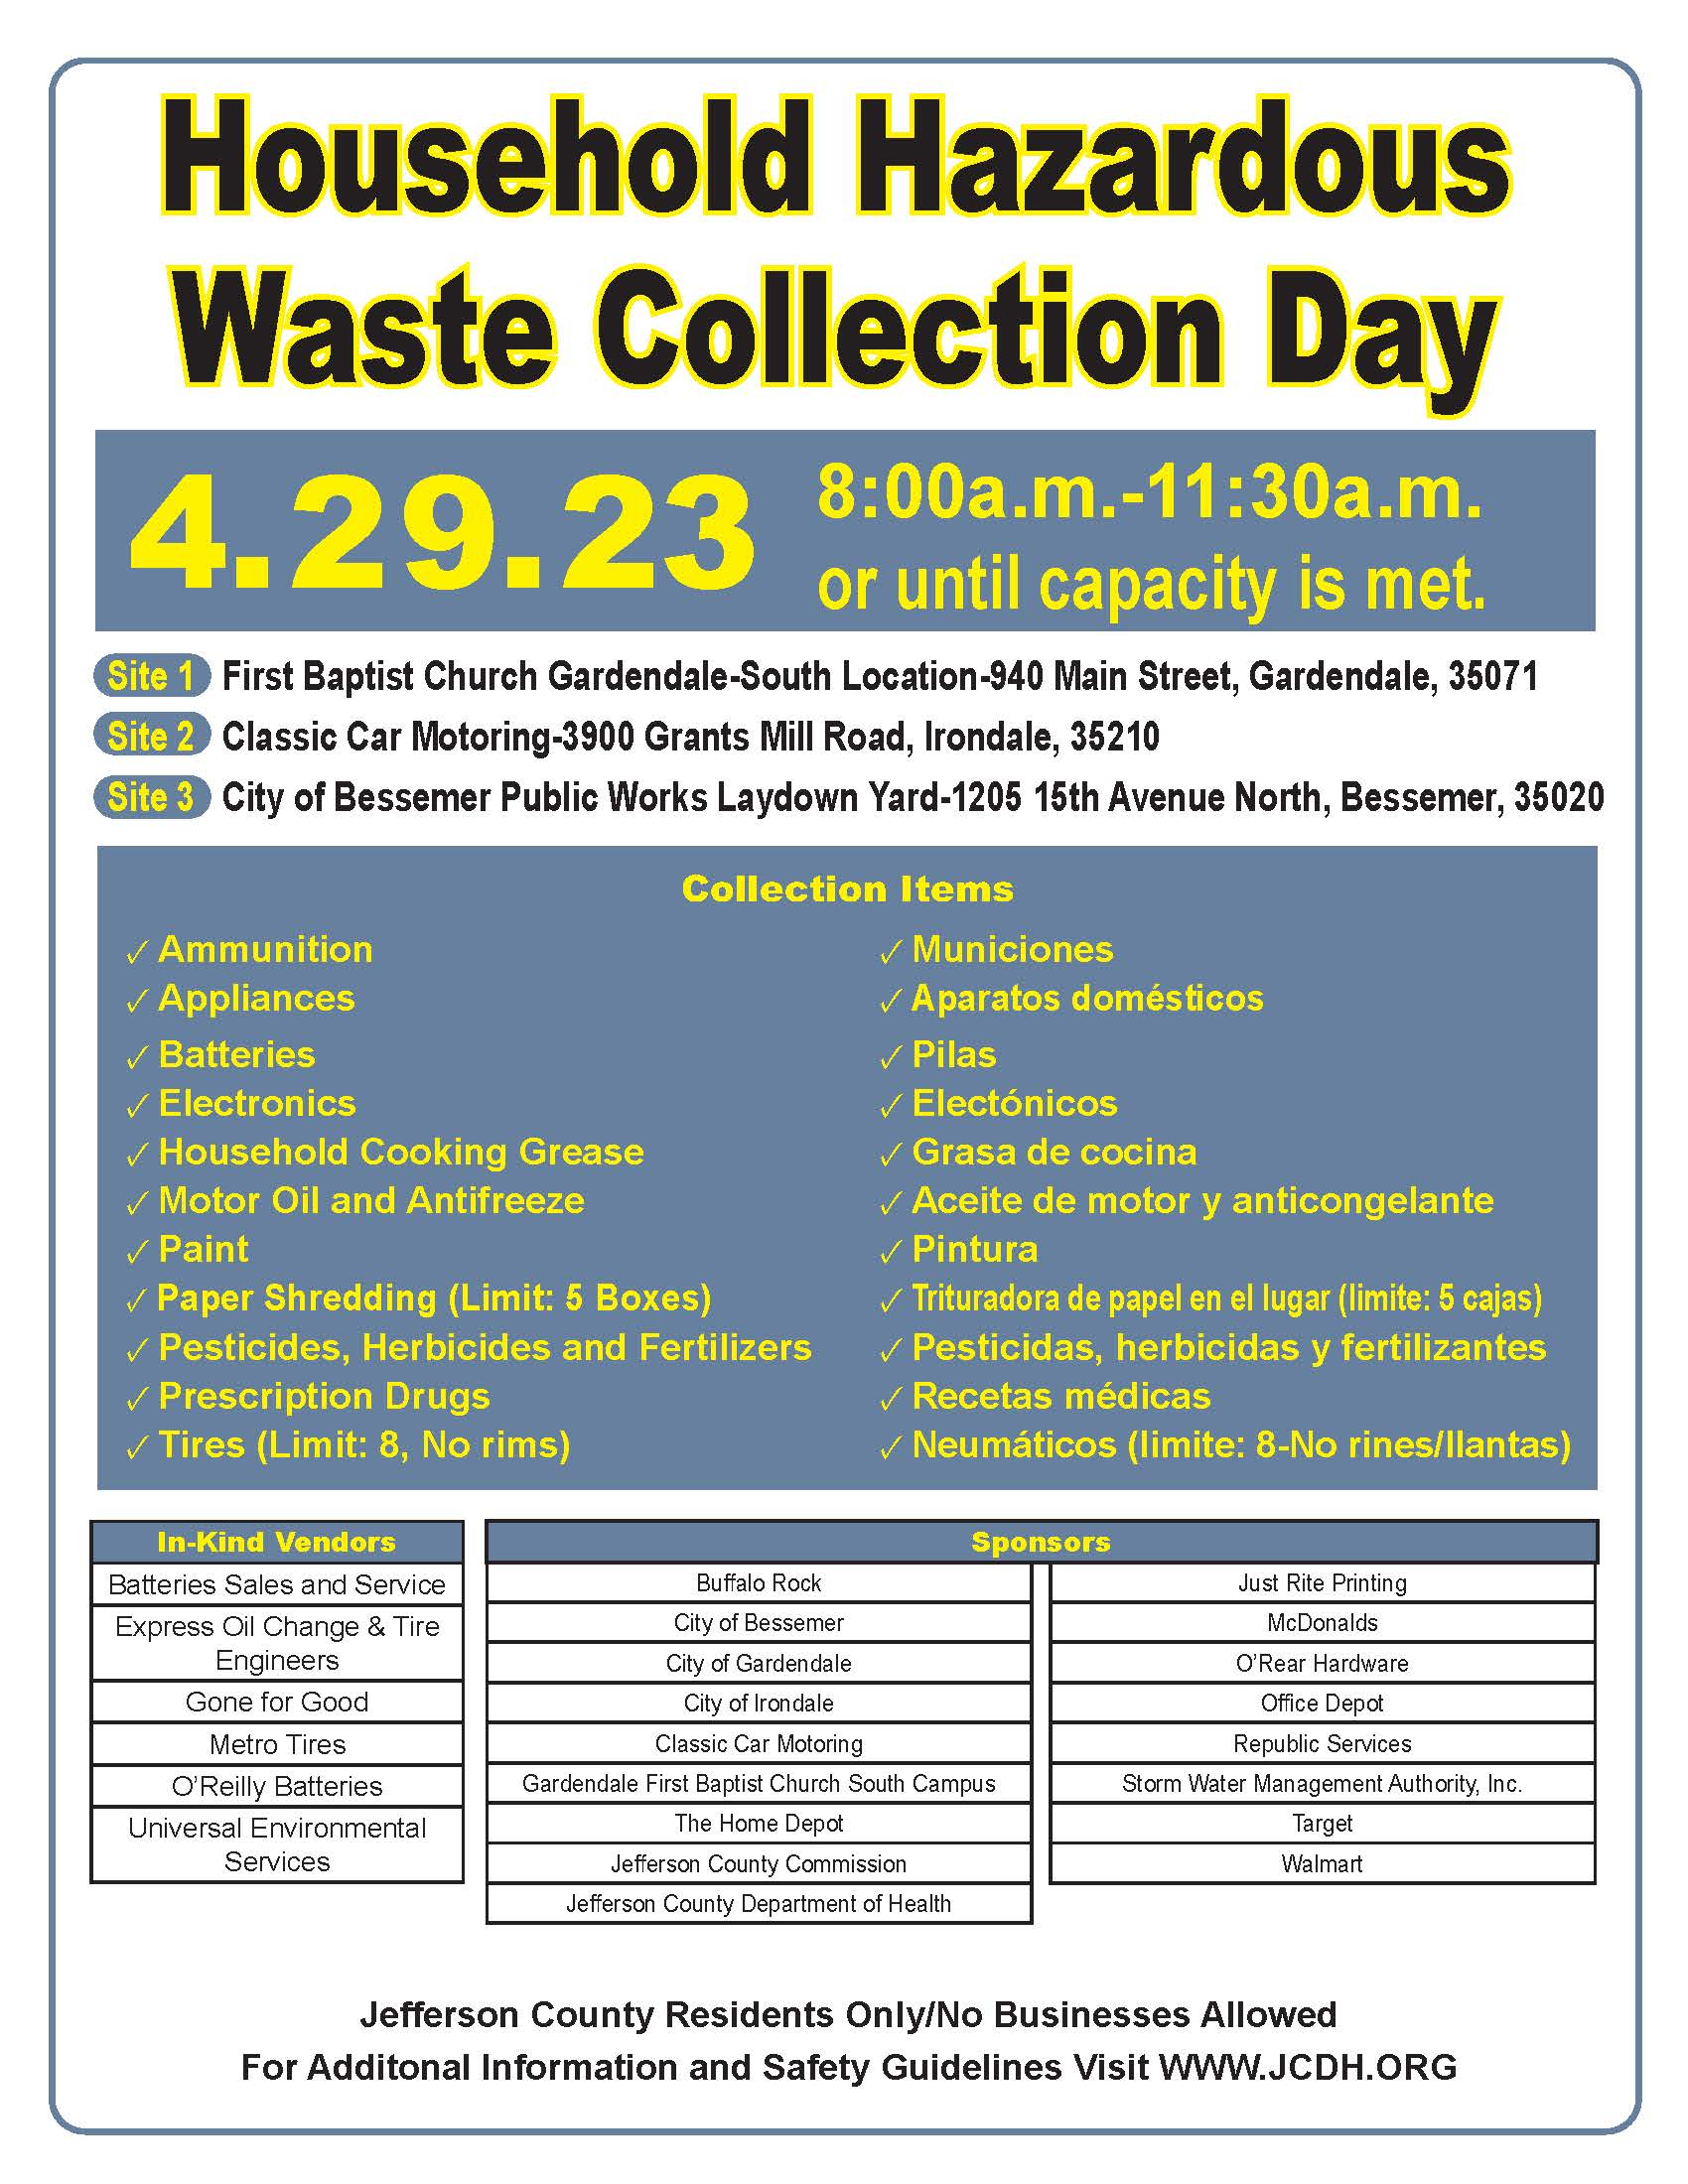 Jefferson County Commission announces local Household Hazardous Waste Collection Day